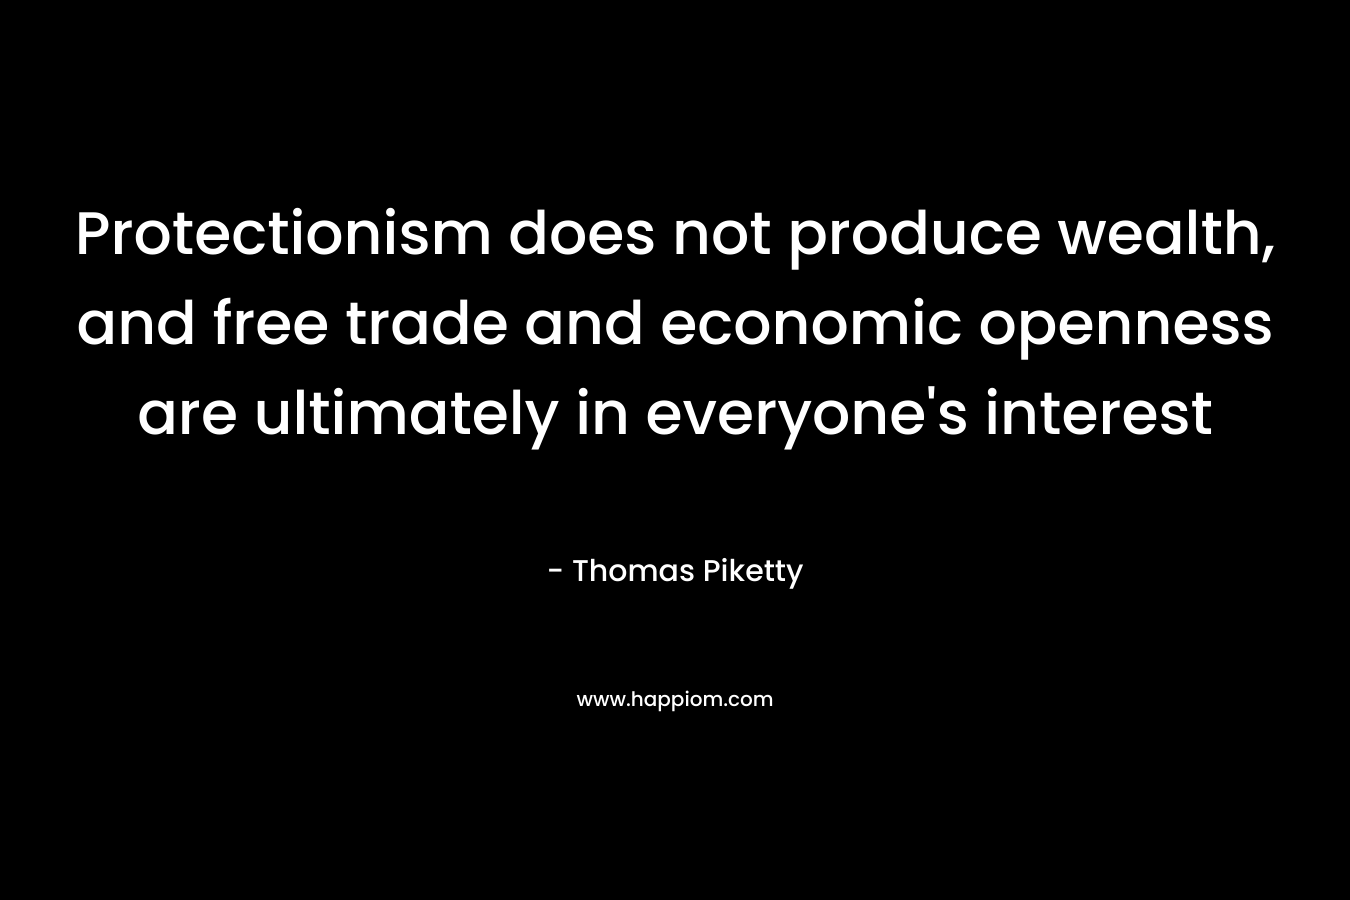 Protectionism does not produce wealth, and free trade and economic openness are ultimately in everyone’s interest – Thomas Piketty